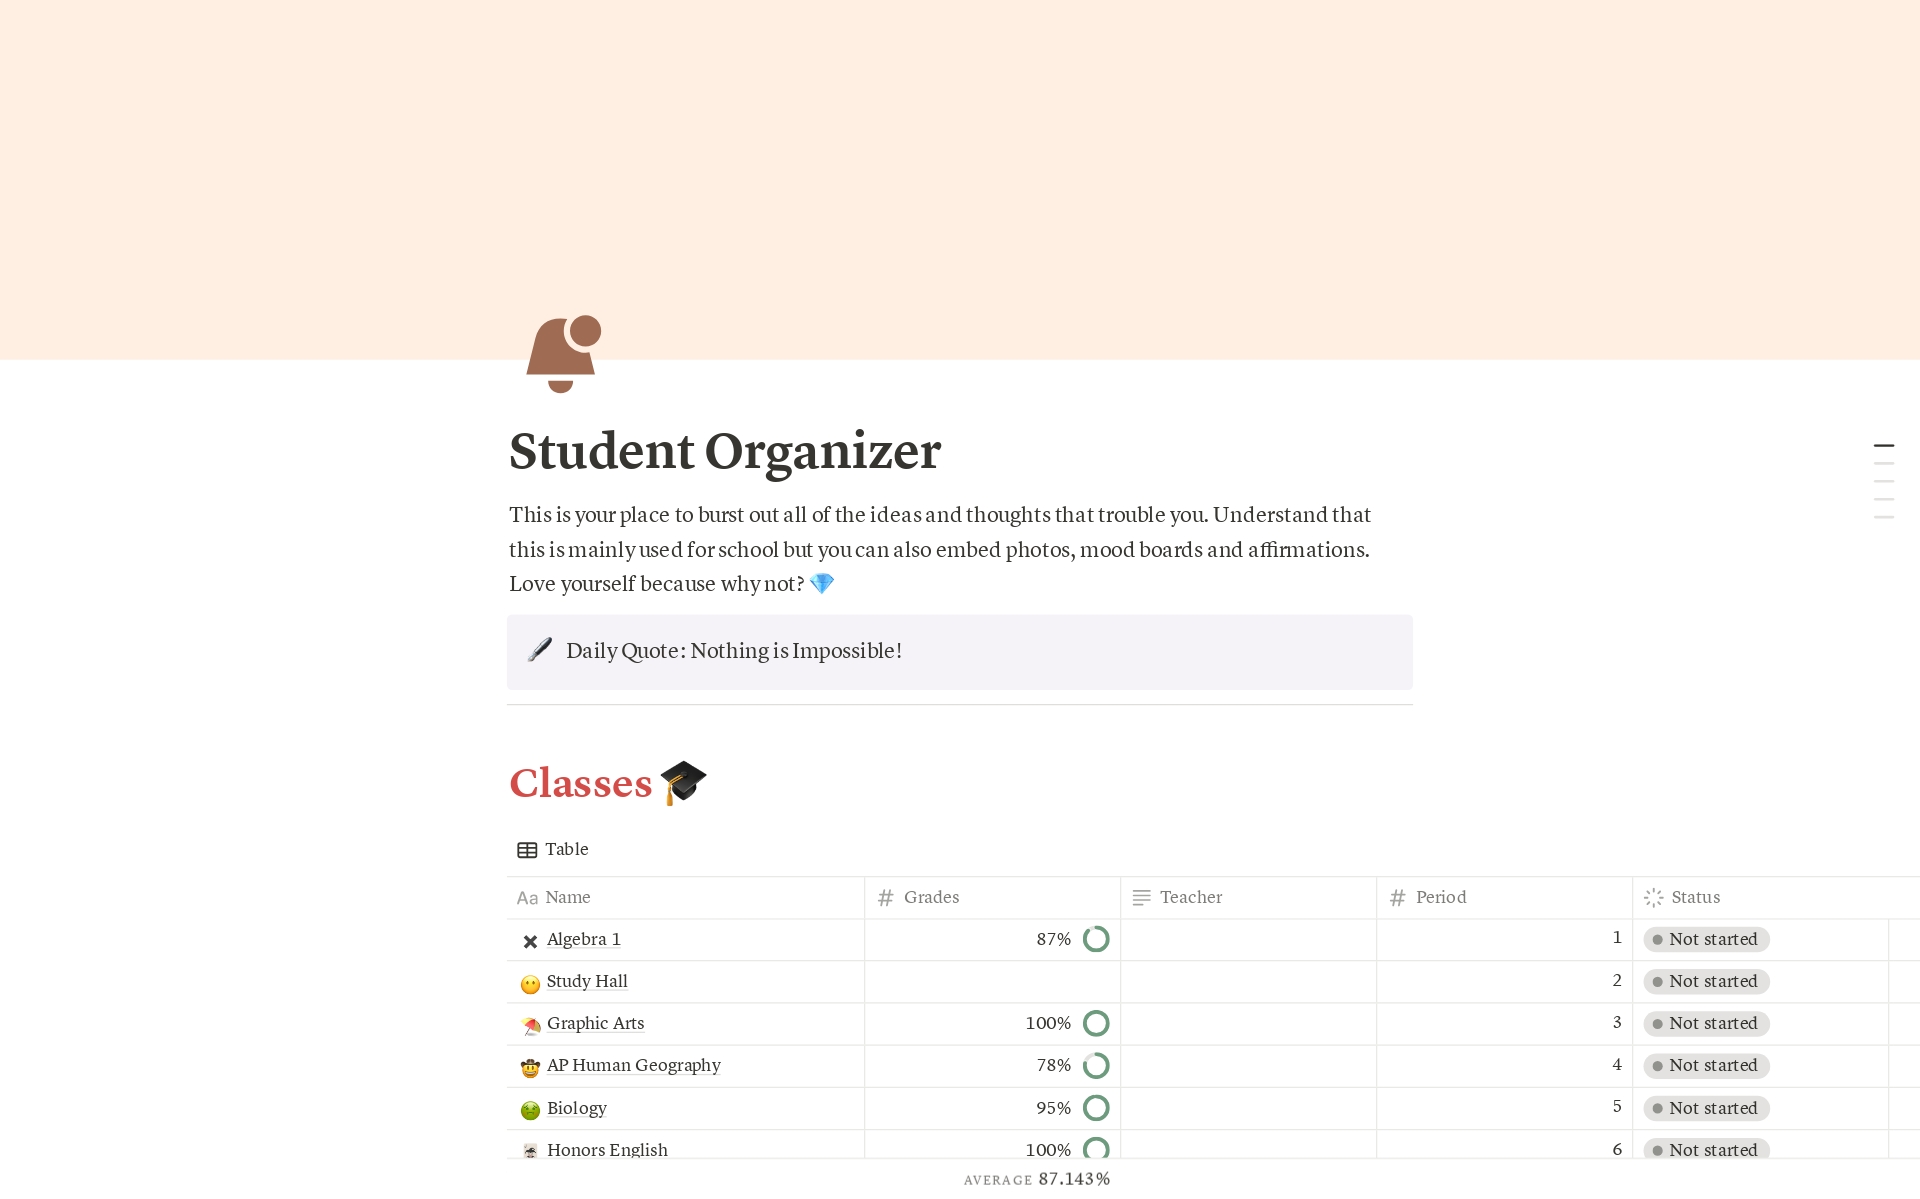 This is a place for students to gather all of their achievements and events in one notion template. This template will also give a boost for students trying to organize their profile for colleges.